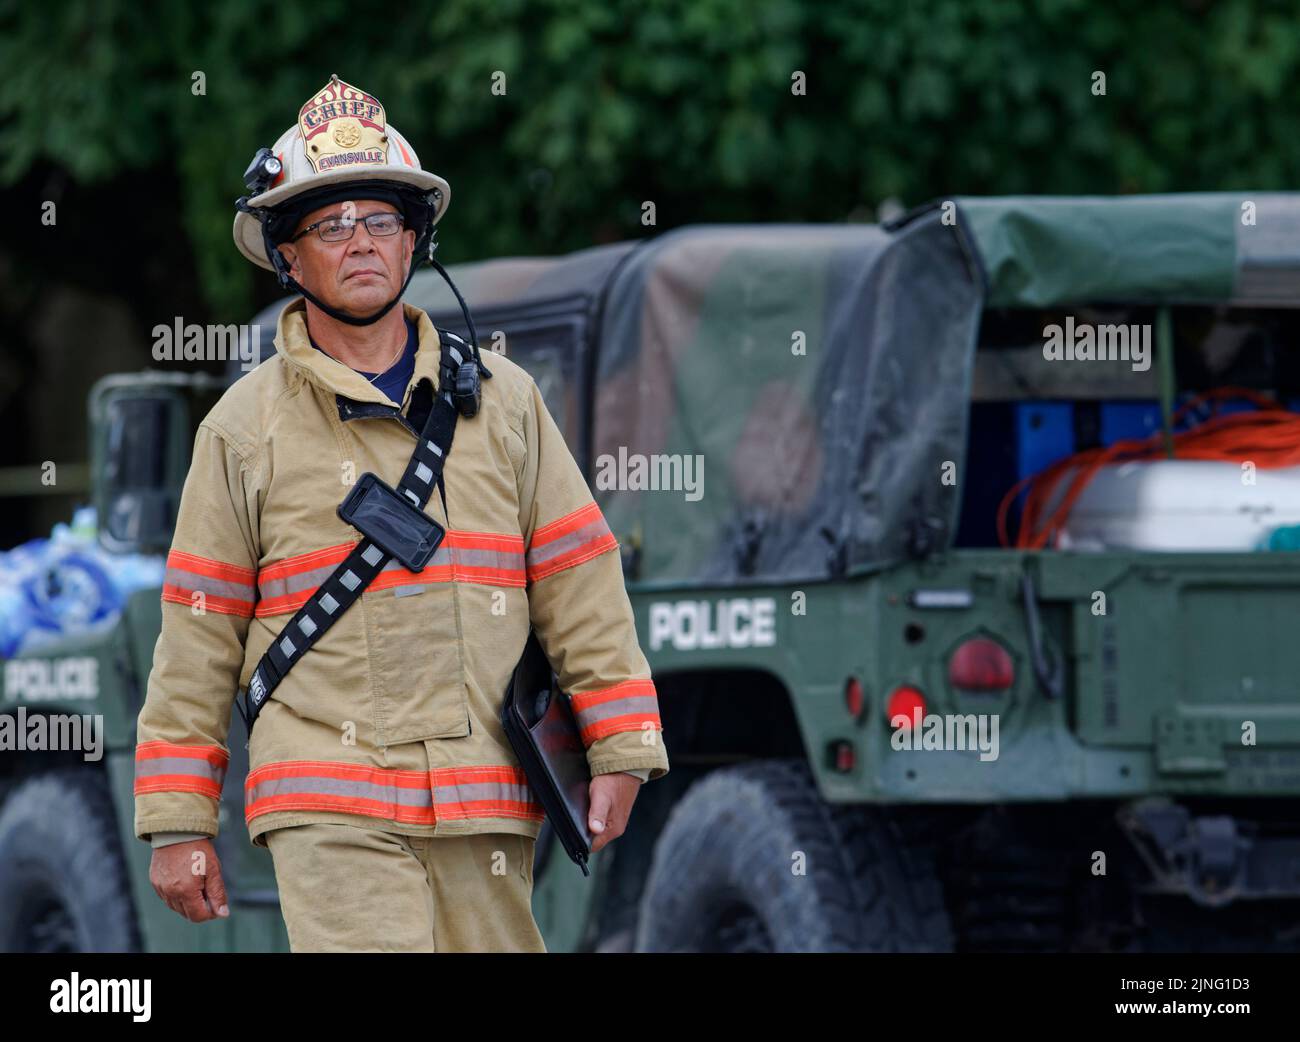 Evansville, Indiana, USA. 11 Aug 2022. Evansville Fire Department Chief Mike Connelly walks away from the area where a house exploded the previous day. Local, state and federal authorities are investigating the explosion, which killed at least three people and damaged 39 homes in the area, leaving 11 uninhabitable. (Credit: Billy Suratt/Apex MediaWire via Alamy Live News) Stock Photo